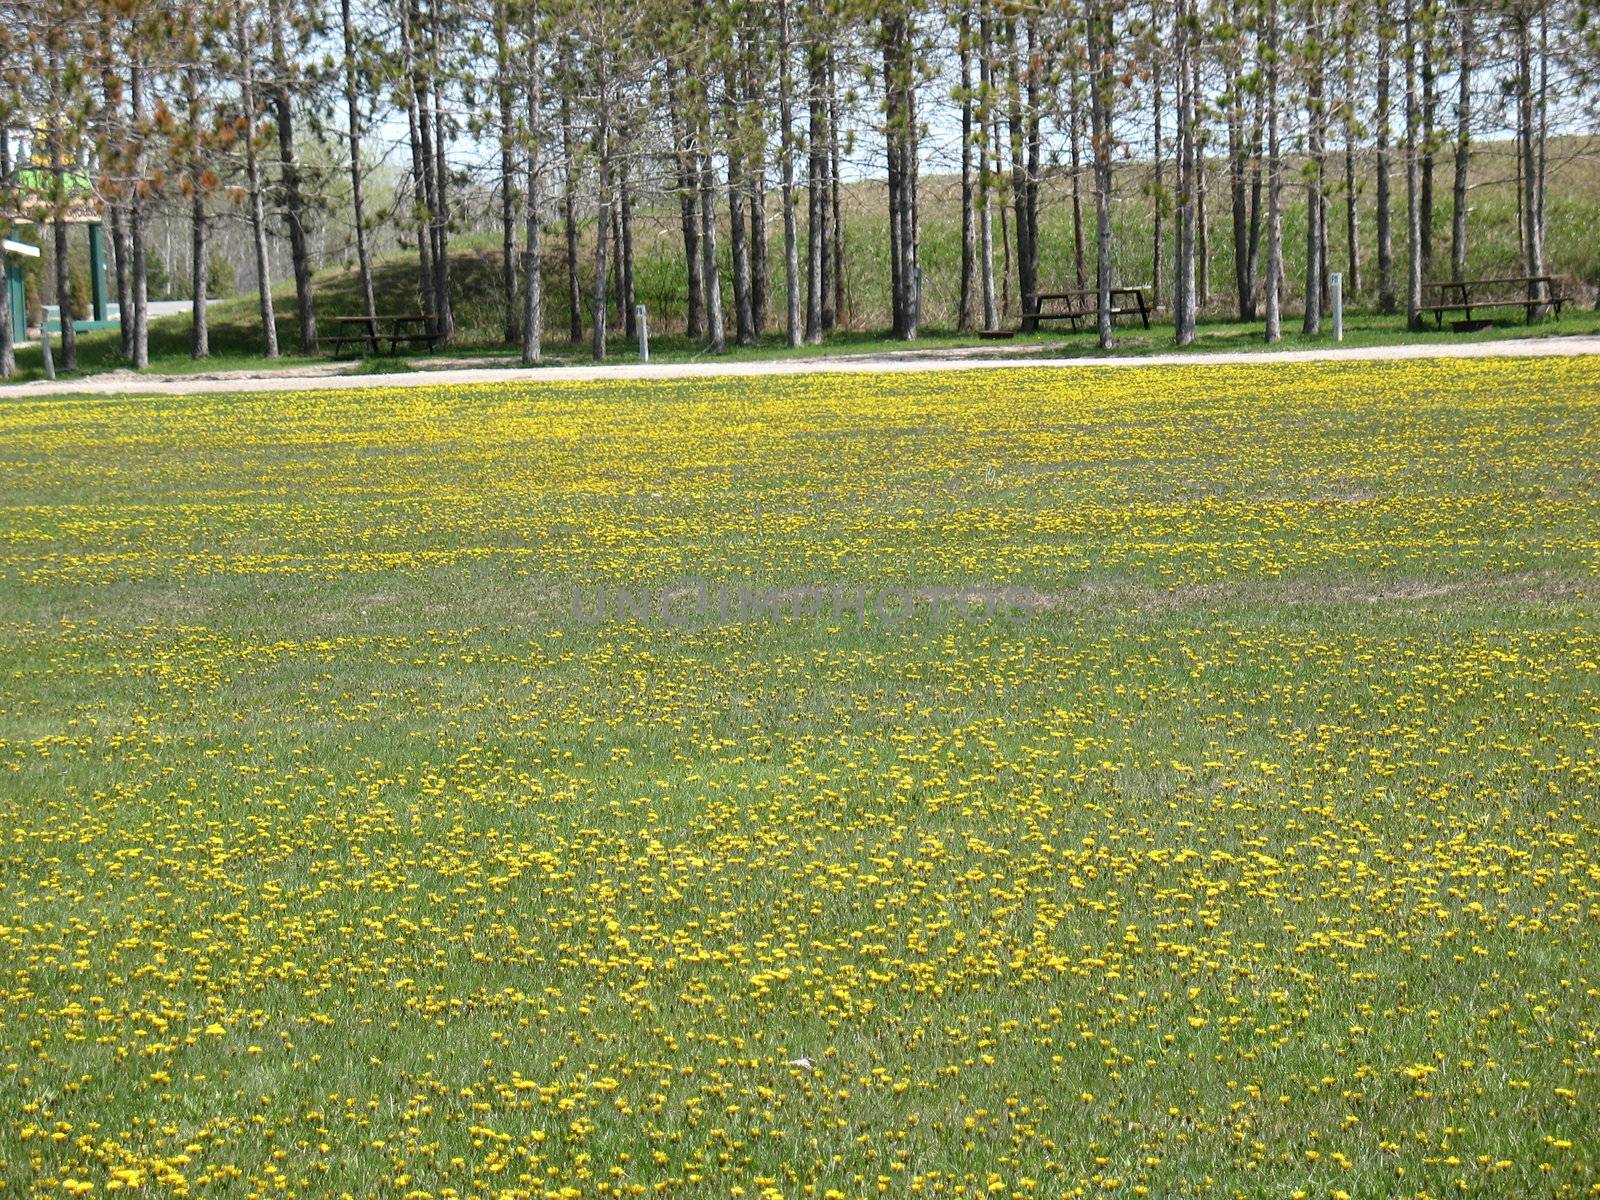 Image of a carpet of dandelions in a field surrounded by trees.